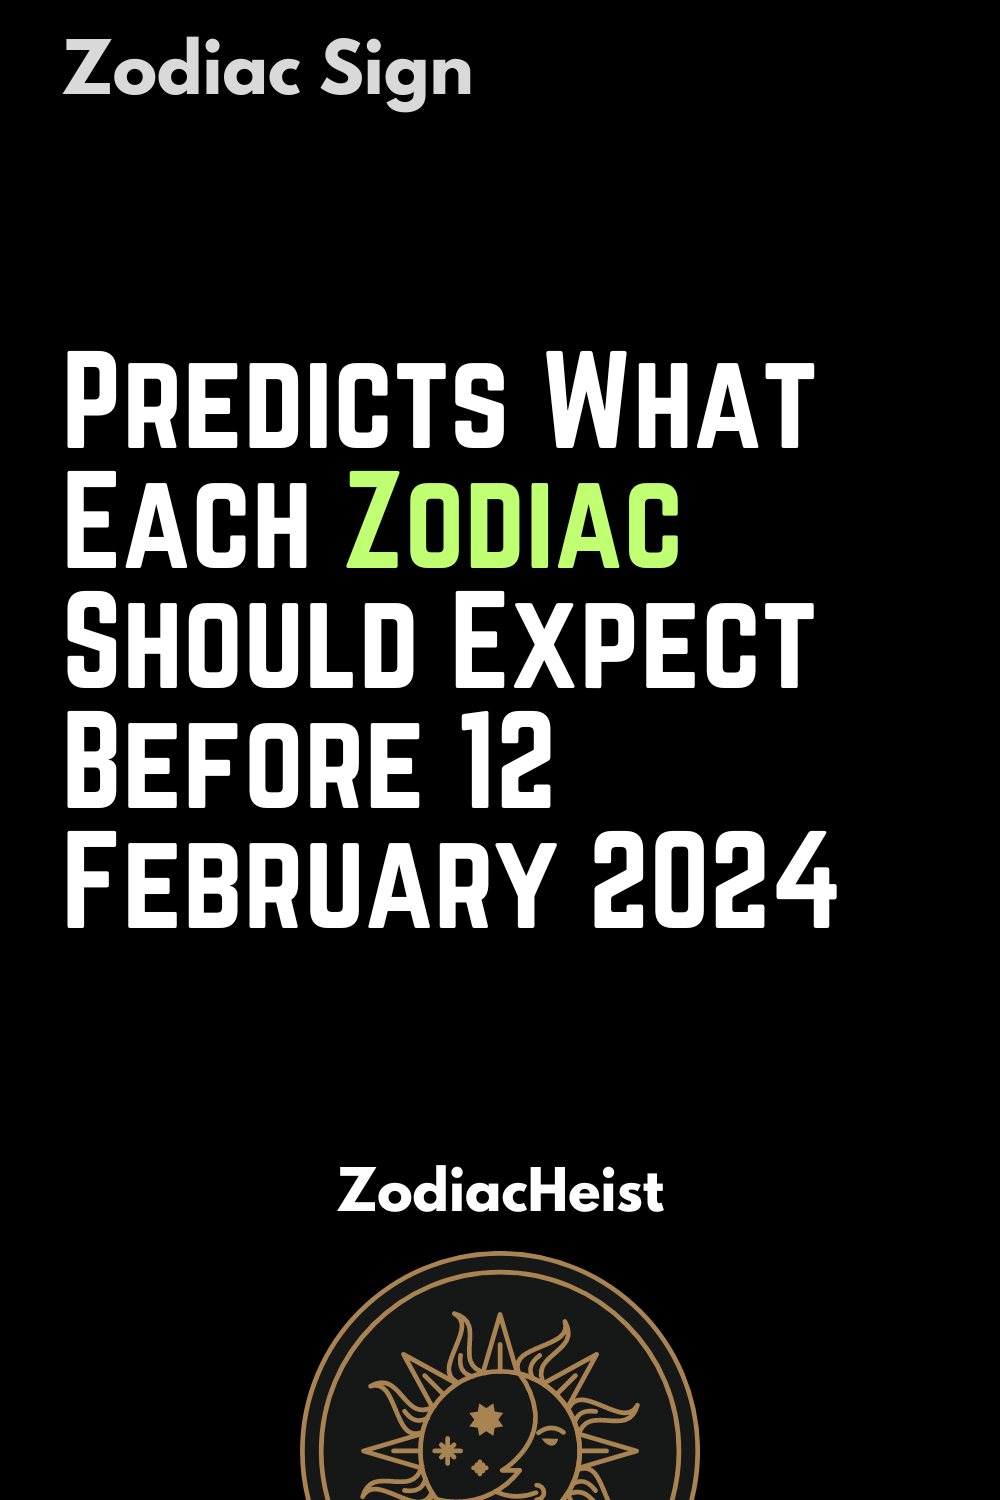 Predicts What Each Zodiac Should Expect Before 12 February 2024